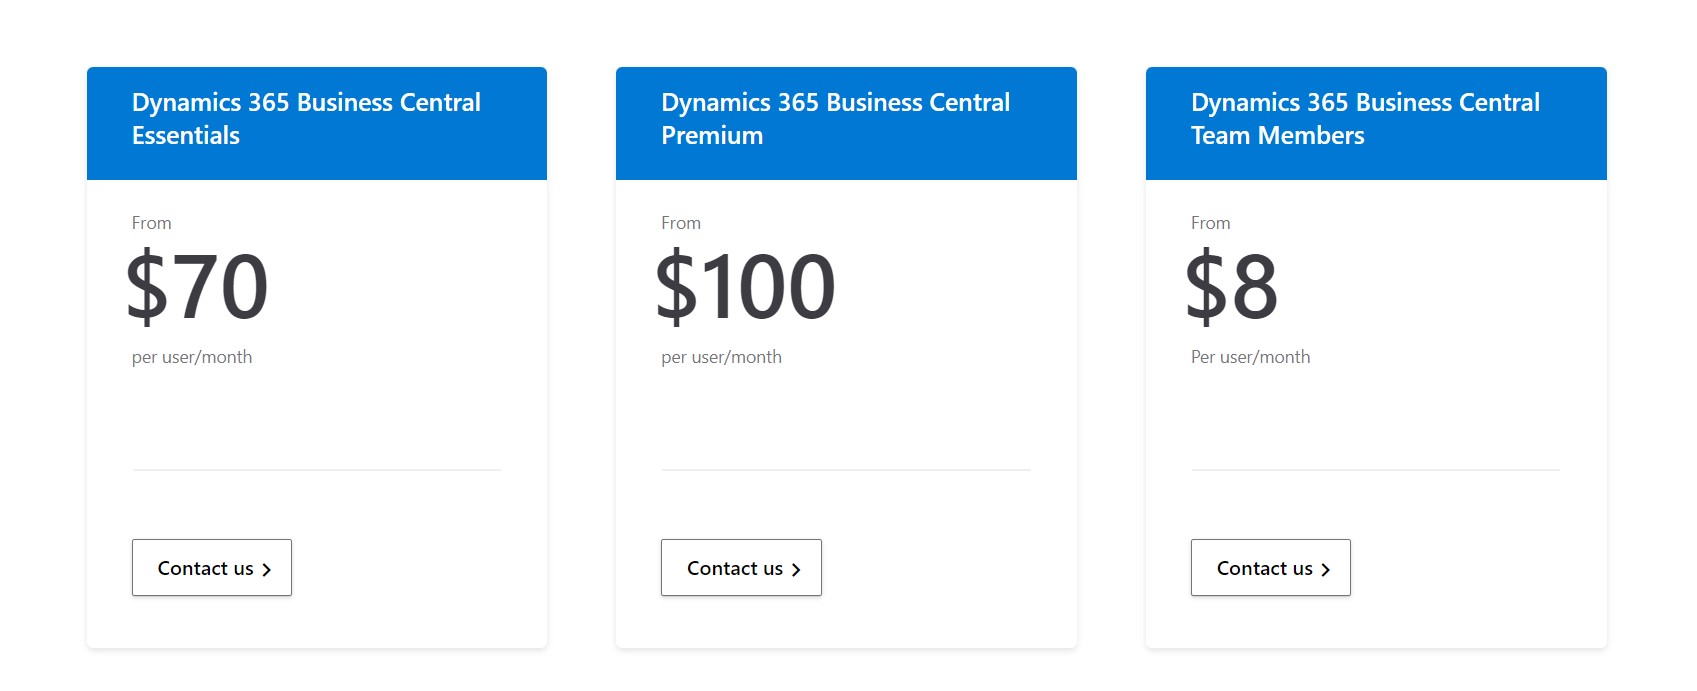 Both subscription and licensing options are available for Microsoft Dynamics 365 Business Central